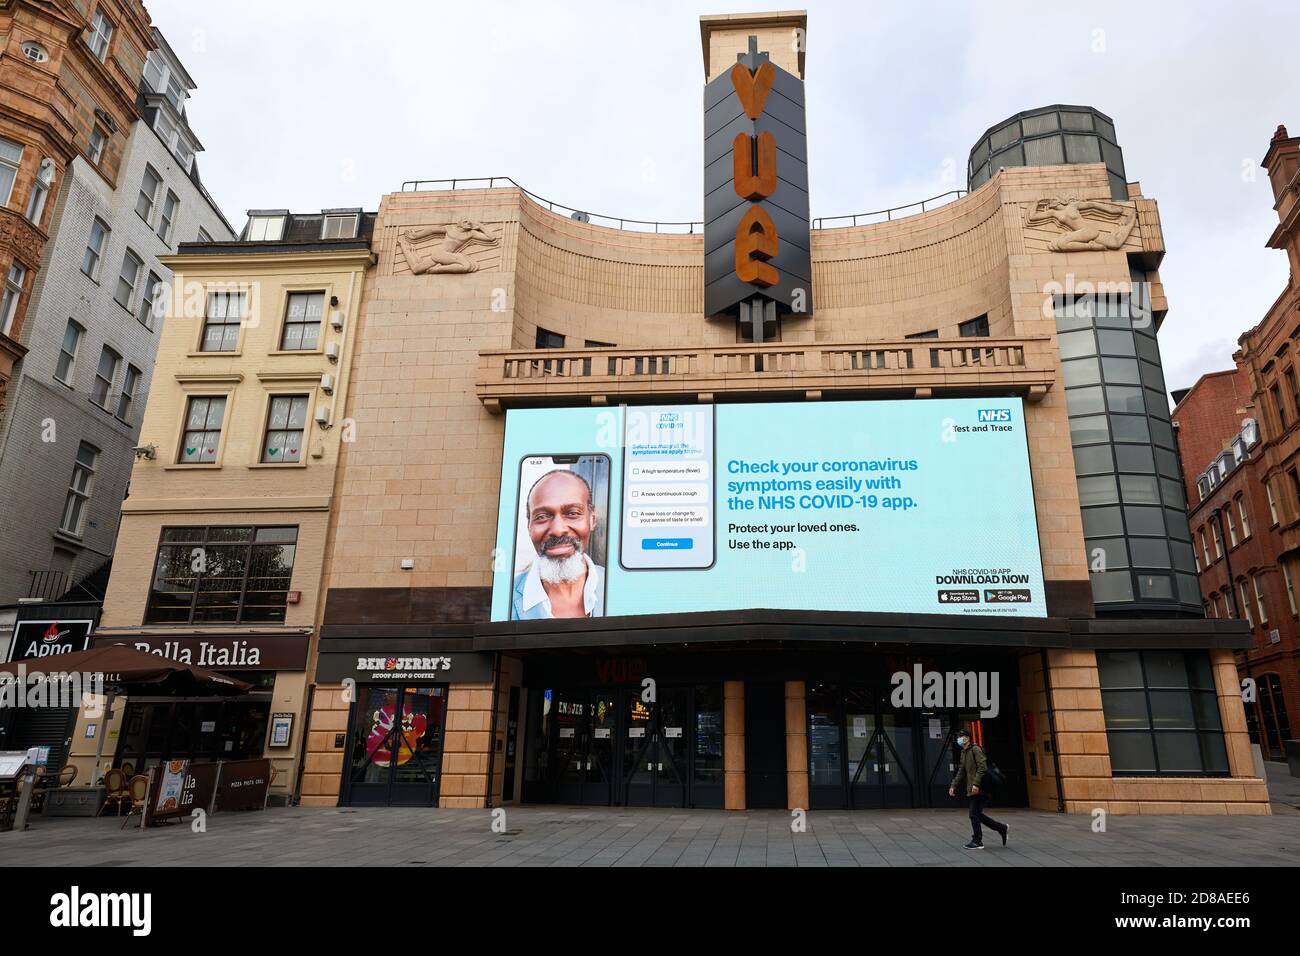 London, UK. - 28 Oct 2020: The huge electronic redograph at the Vue Cinema in Leicester Square is being used to display government coronvirus adverts in the absence of new films to promote. Stock Photo